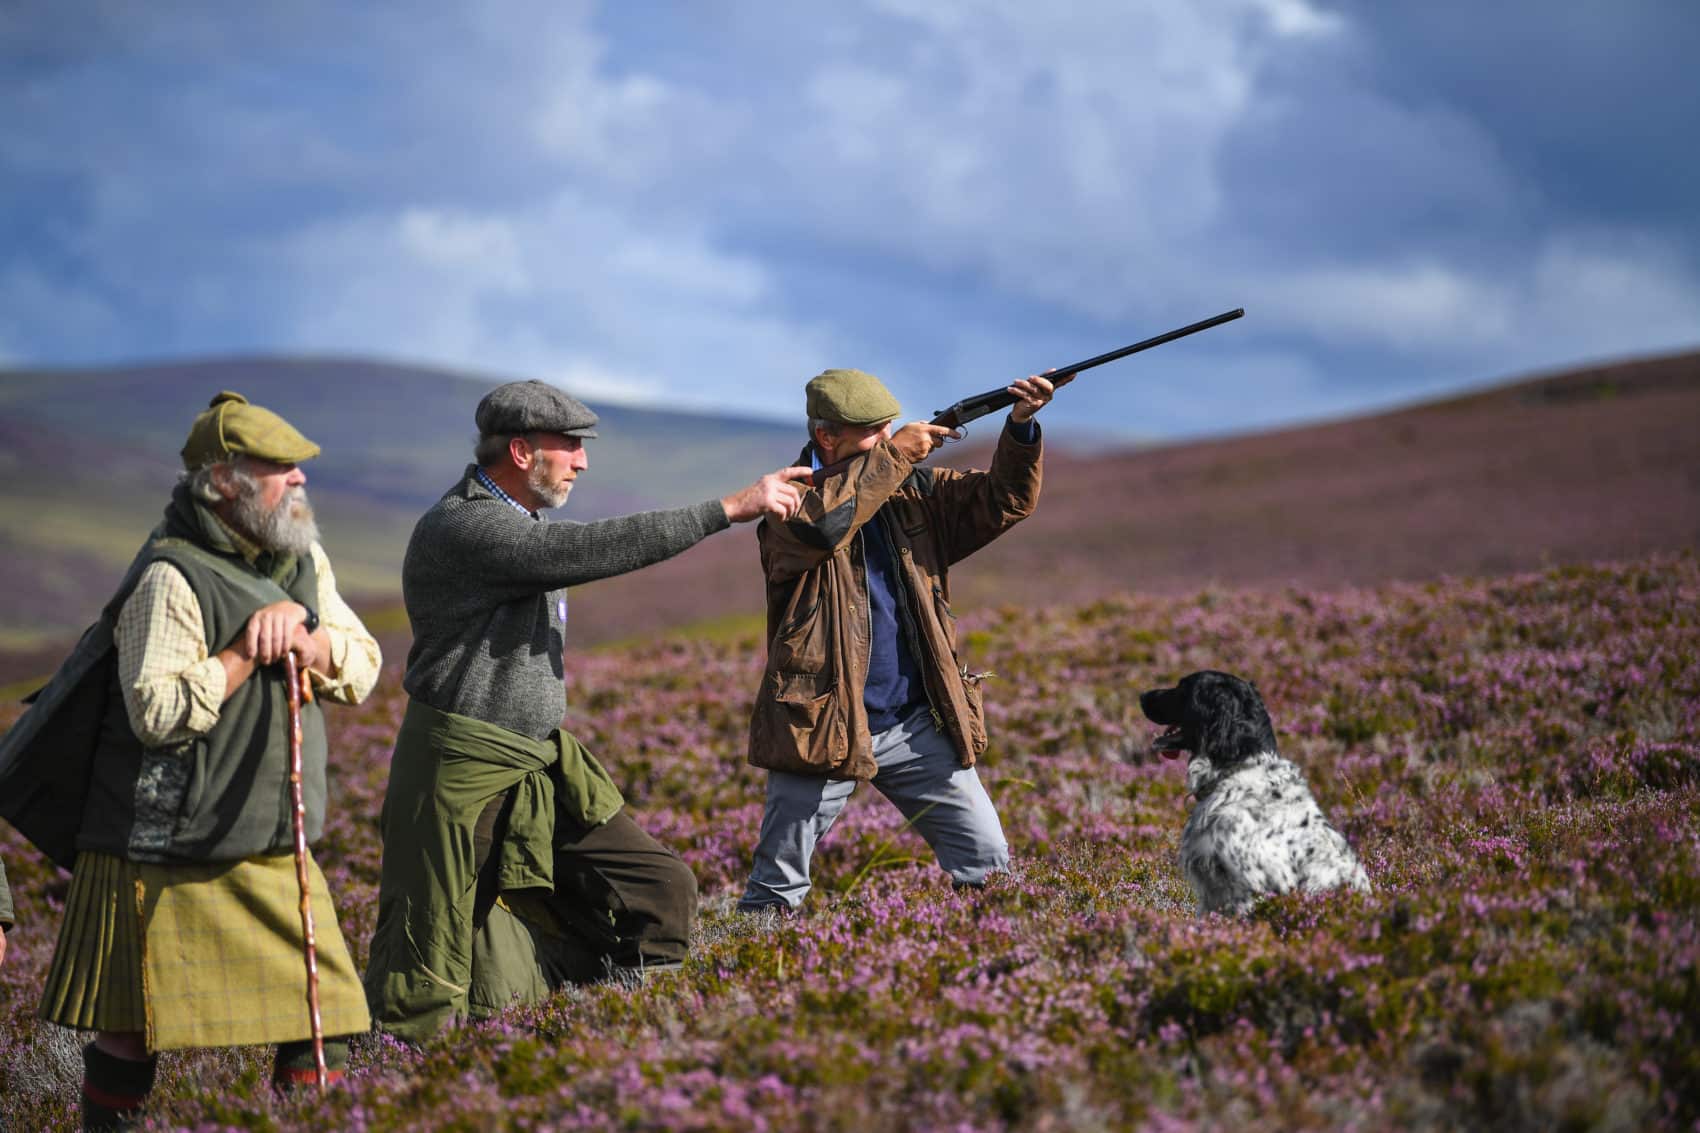 Shooting at Simonstone Hall Hotel - Grouse Shooting, Pheasant Shooting, Clay Pigeon Shooting or Film and Movies Shoots in Hawes, North Yorkshire Dales